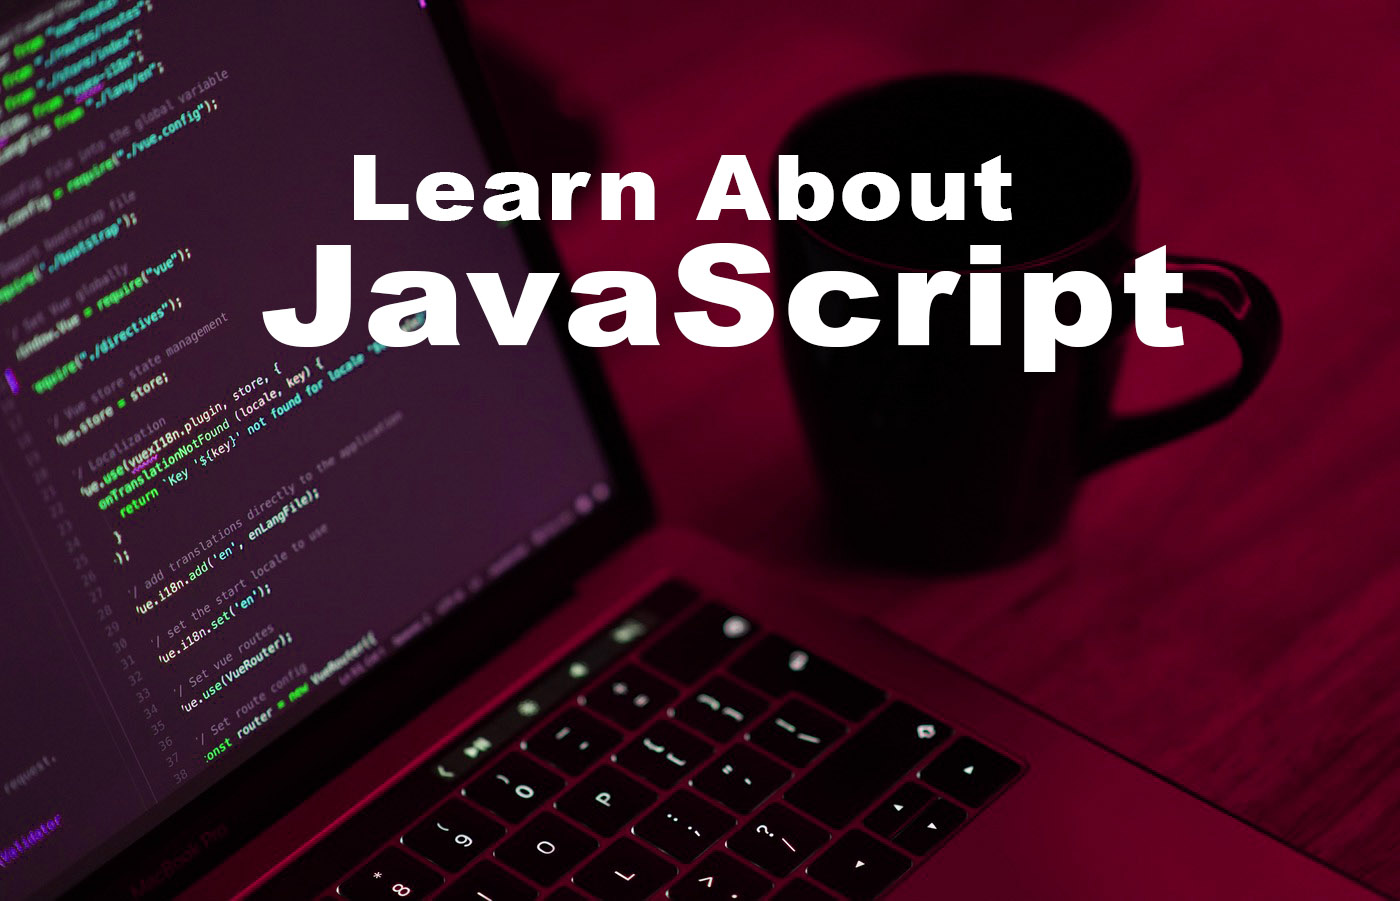 What is JavaScript ?